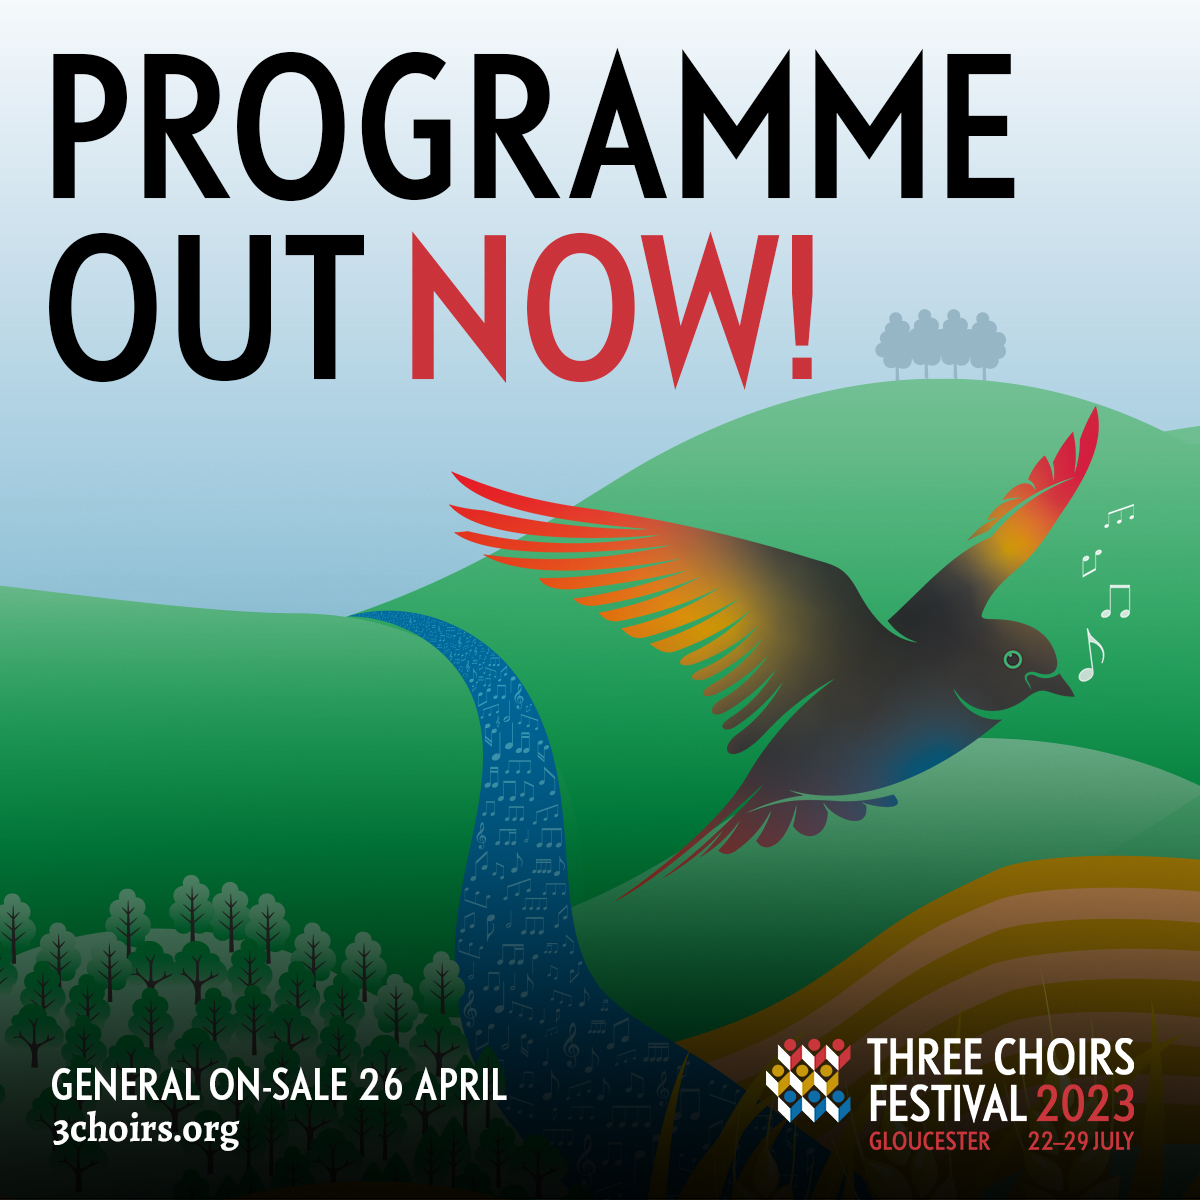 🎉The Three Choirs Festival 2023 Programme is out now! Take a look at what we have in store in Gloucester between the 22–29 July! 🎵
Learn More here 👉 3choirs.org/gloucester-2023
#3choirs #3choirsfestival #gloucester2023